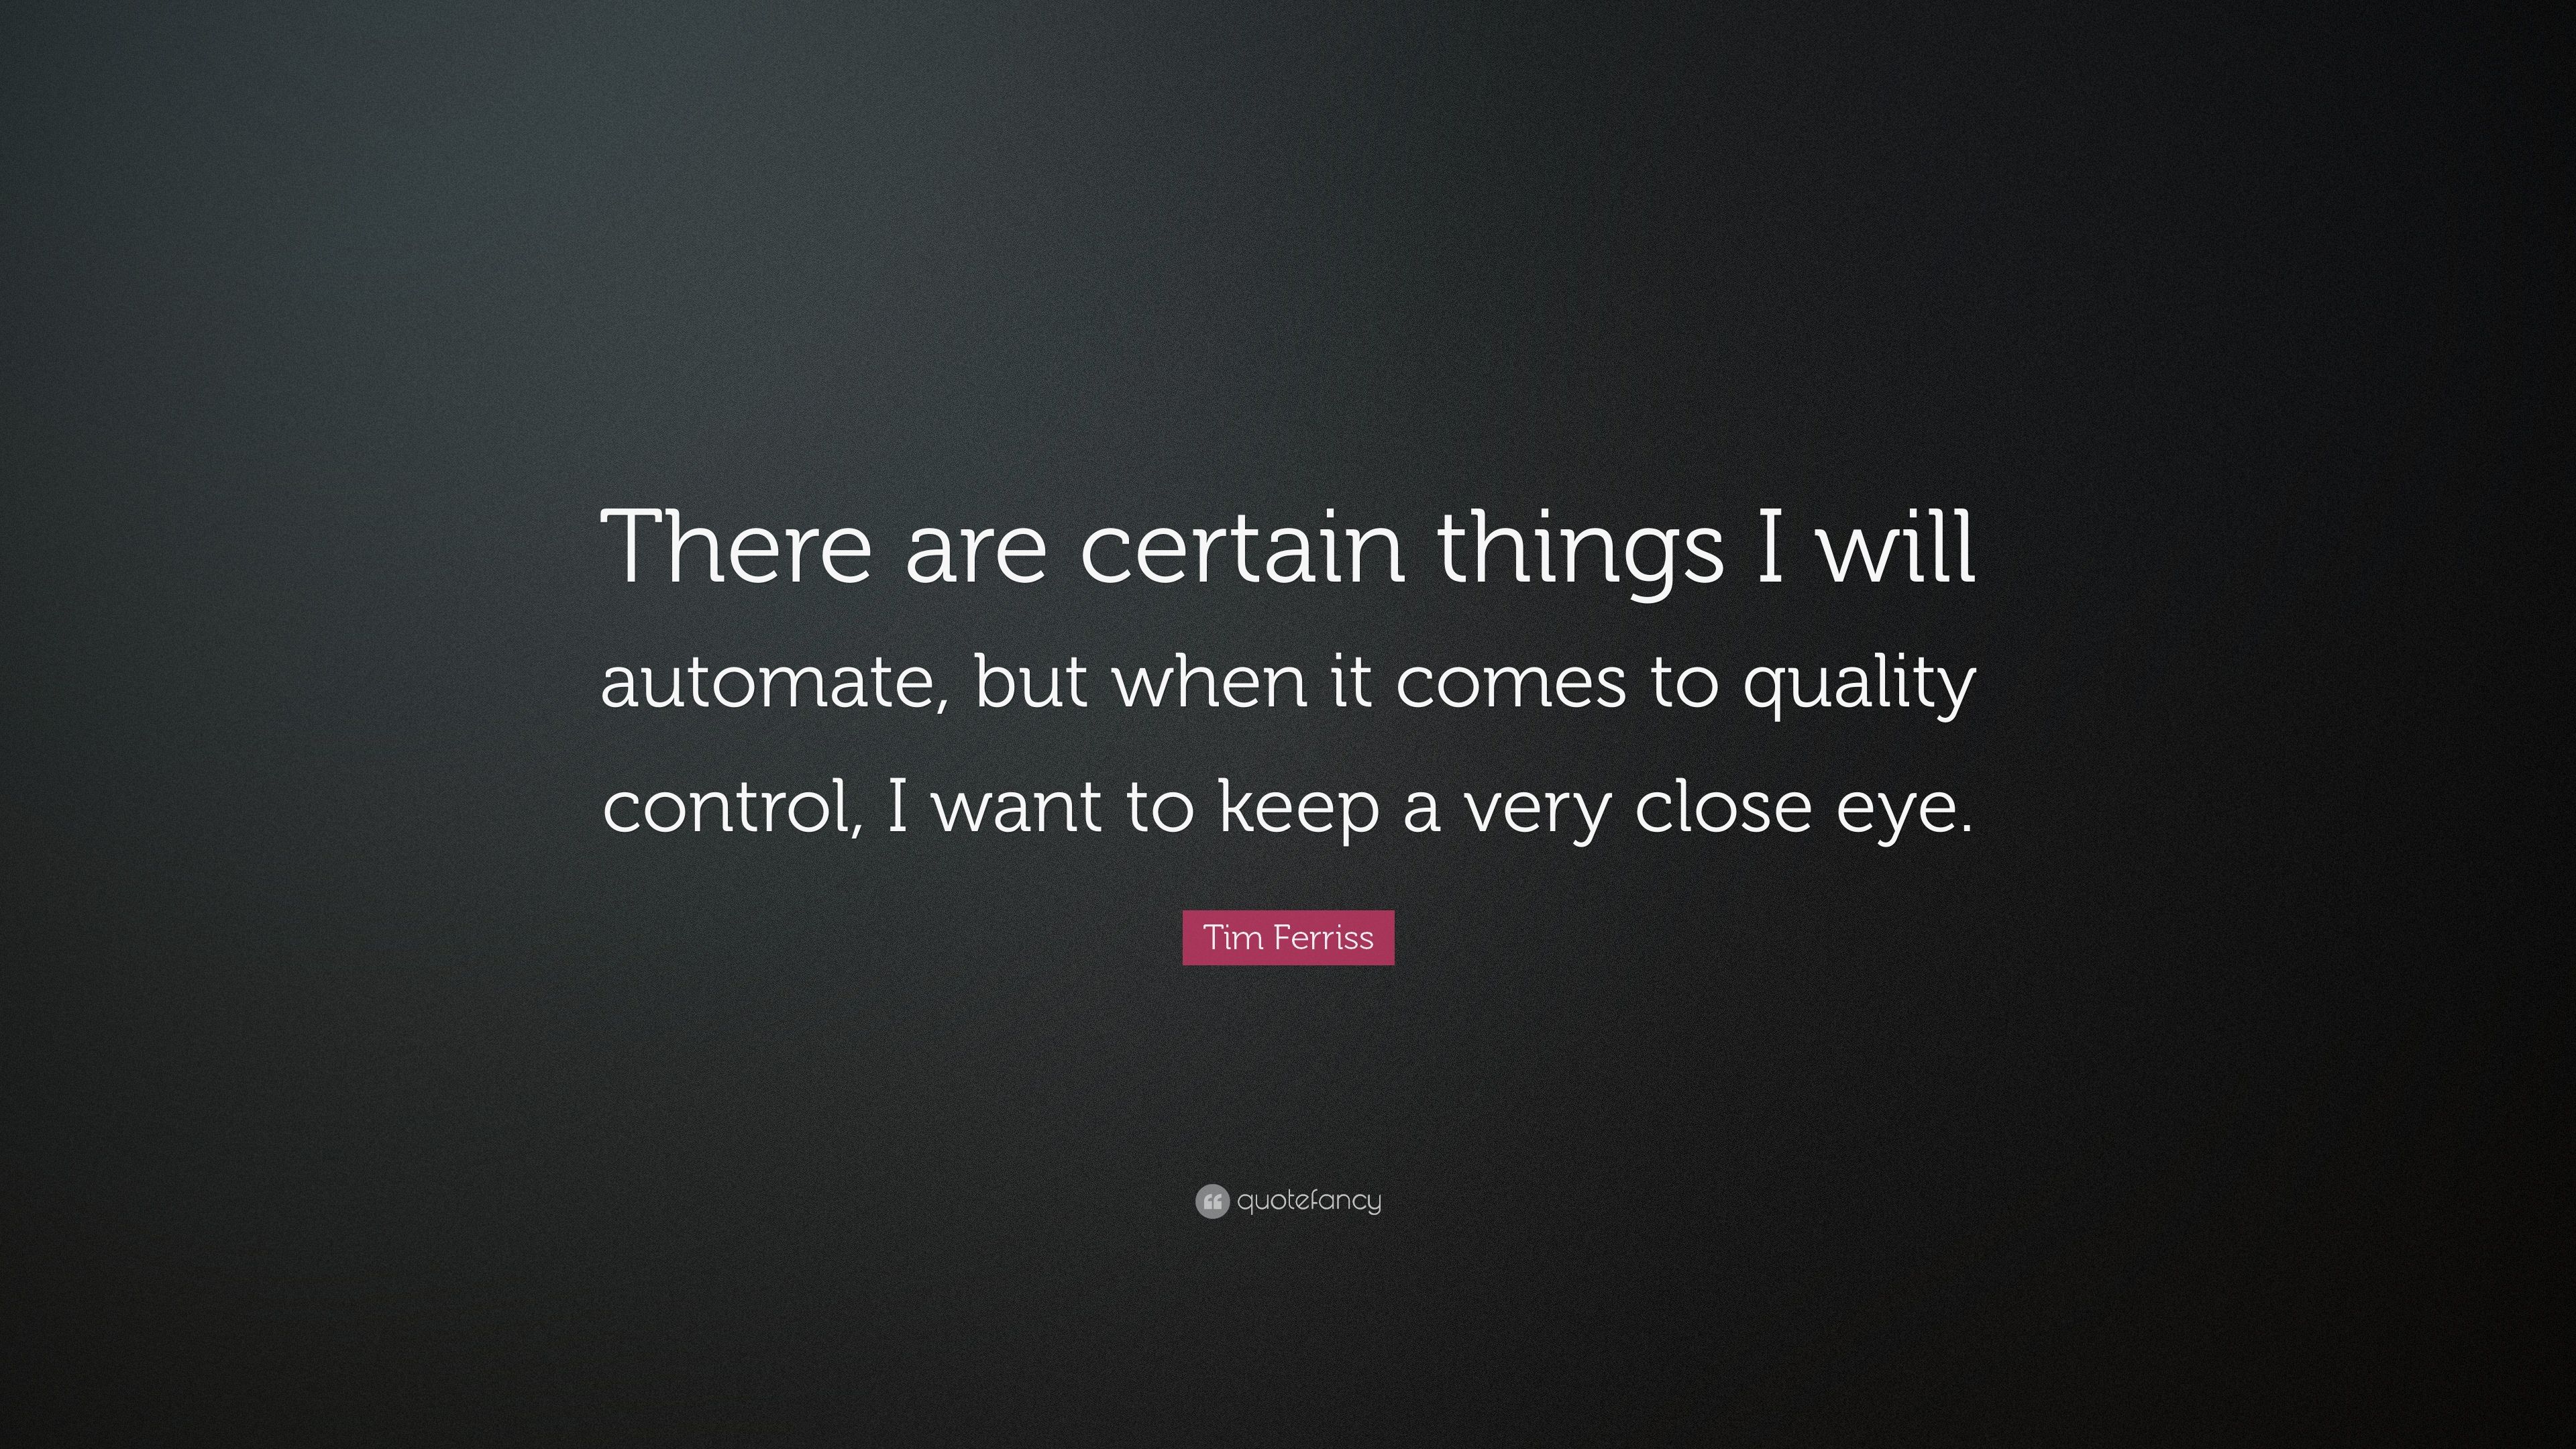 Tim Ferriss Quote: “There are certain things I will automate, but